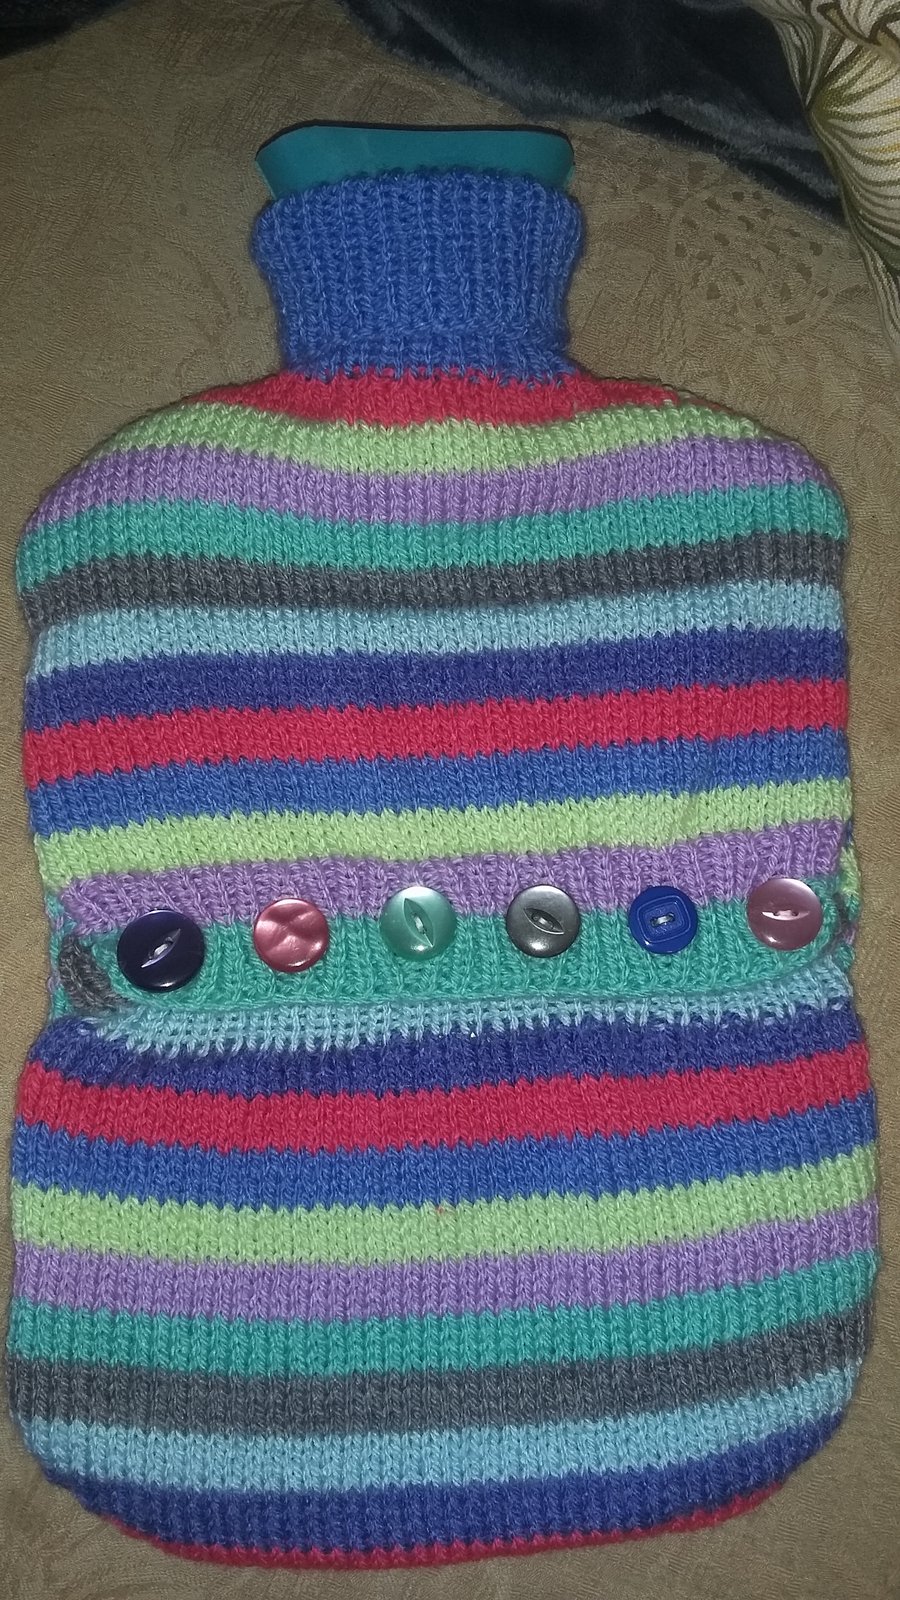 Hand knitted hot water bottle cover (2 litre hot water bottle included)